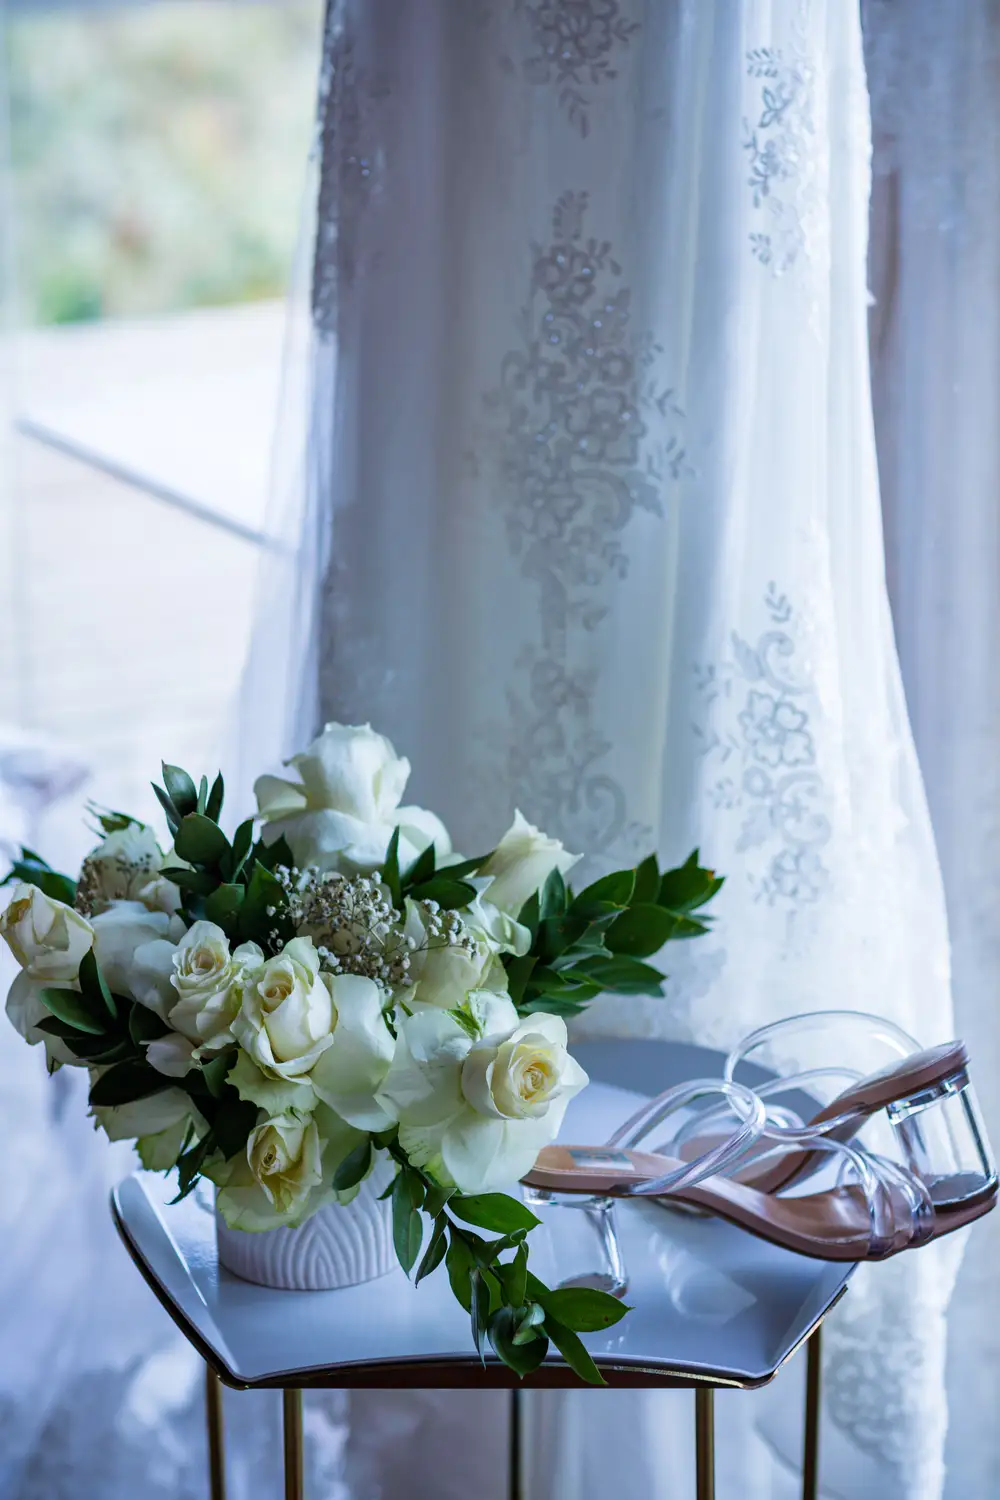 Closeup of White roses with a pair of glass shoes on a stool